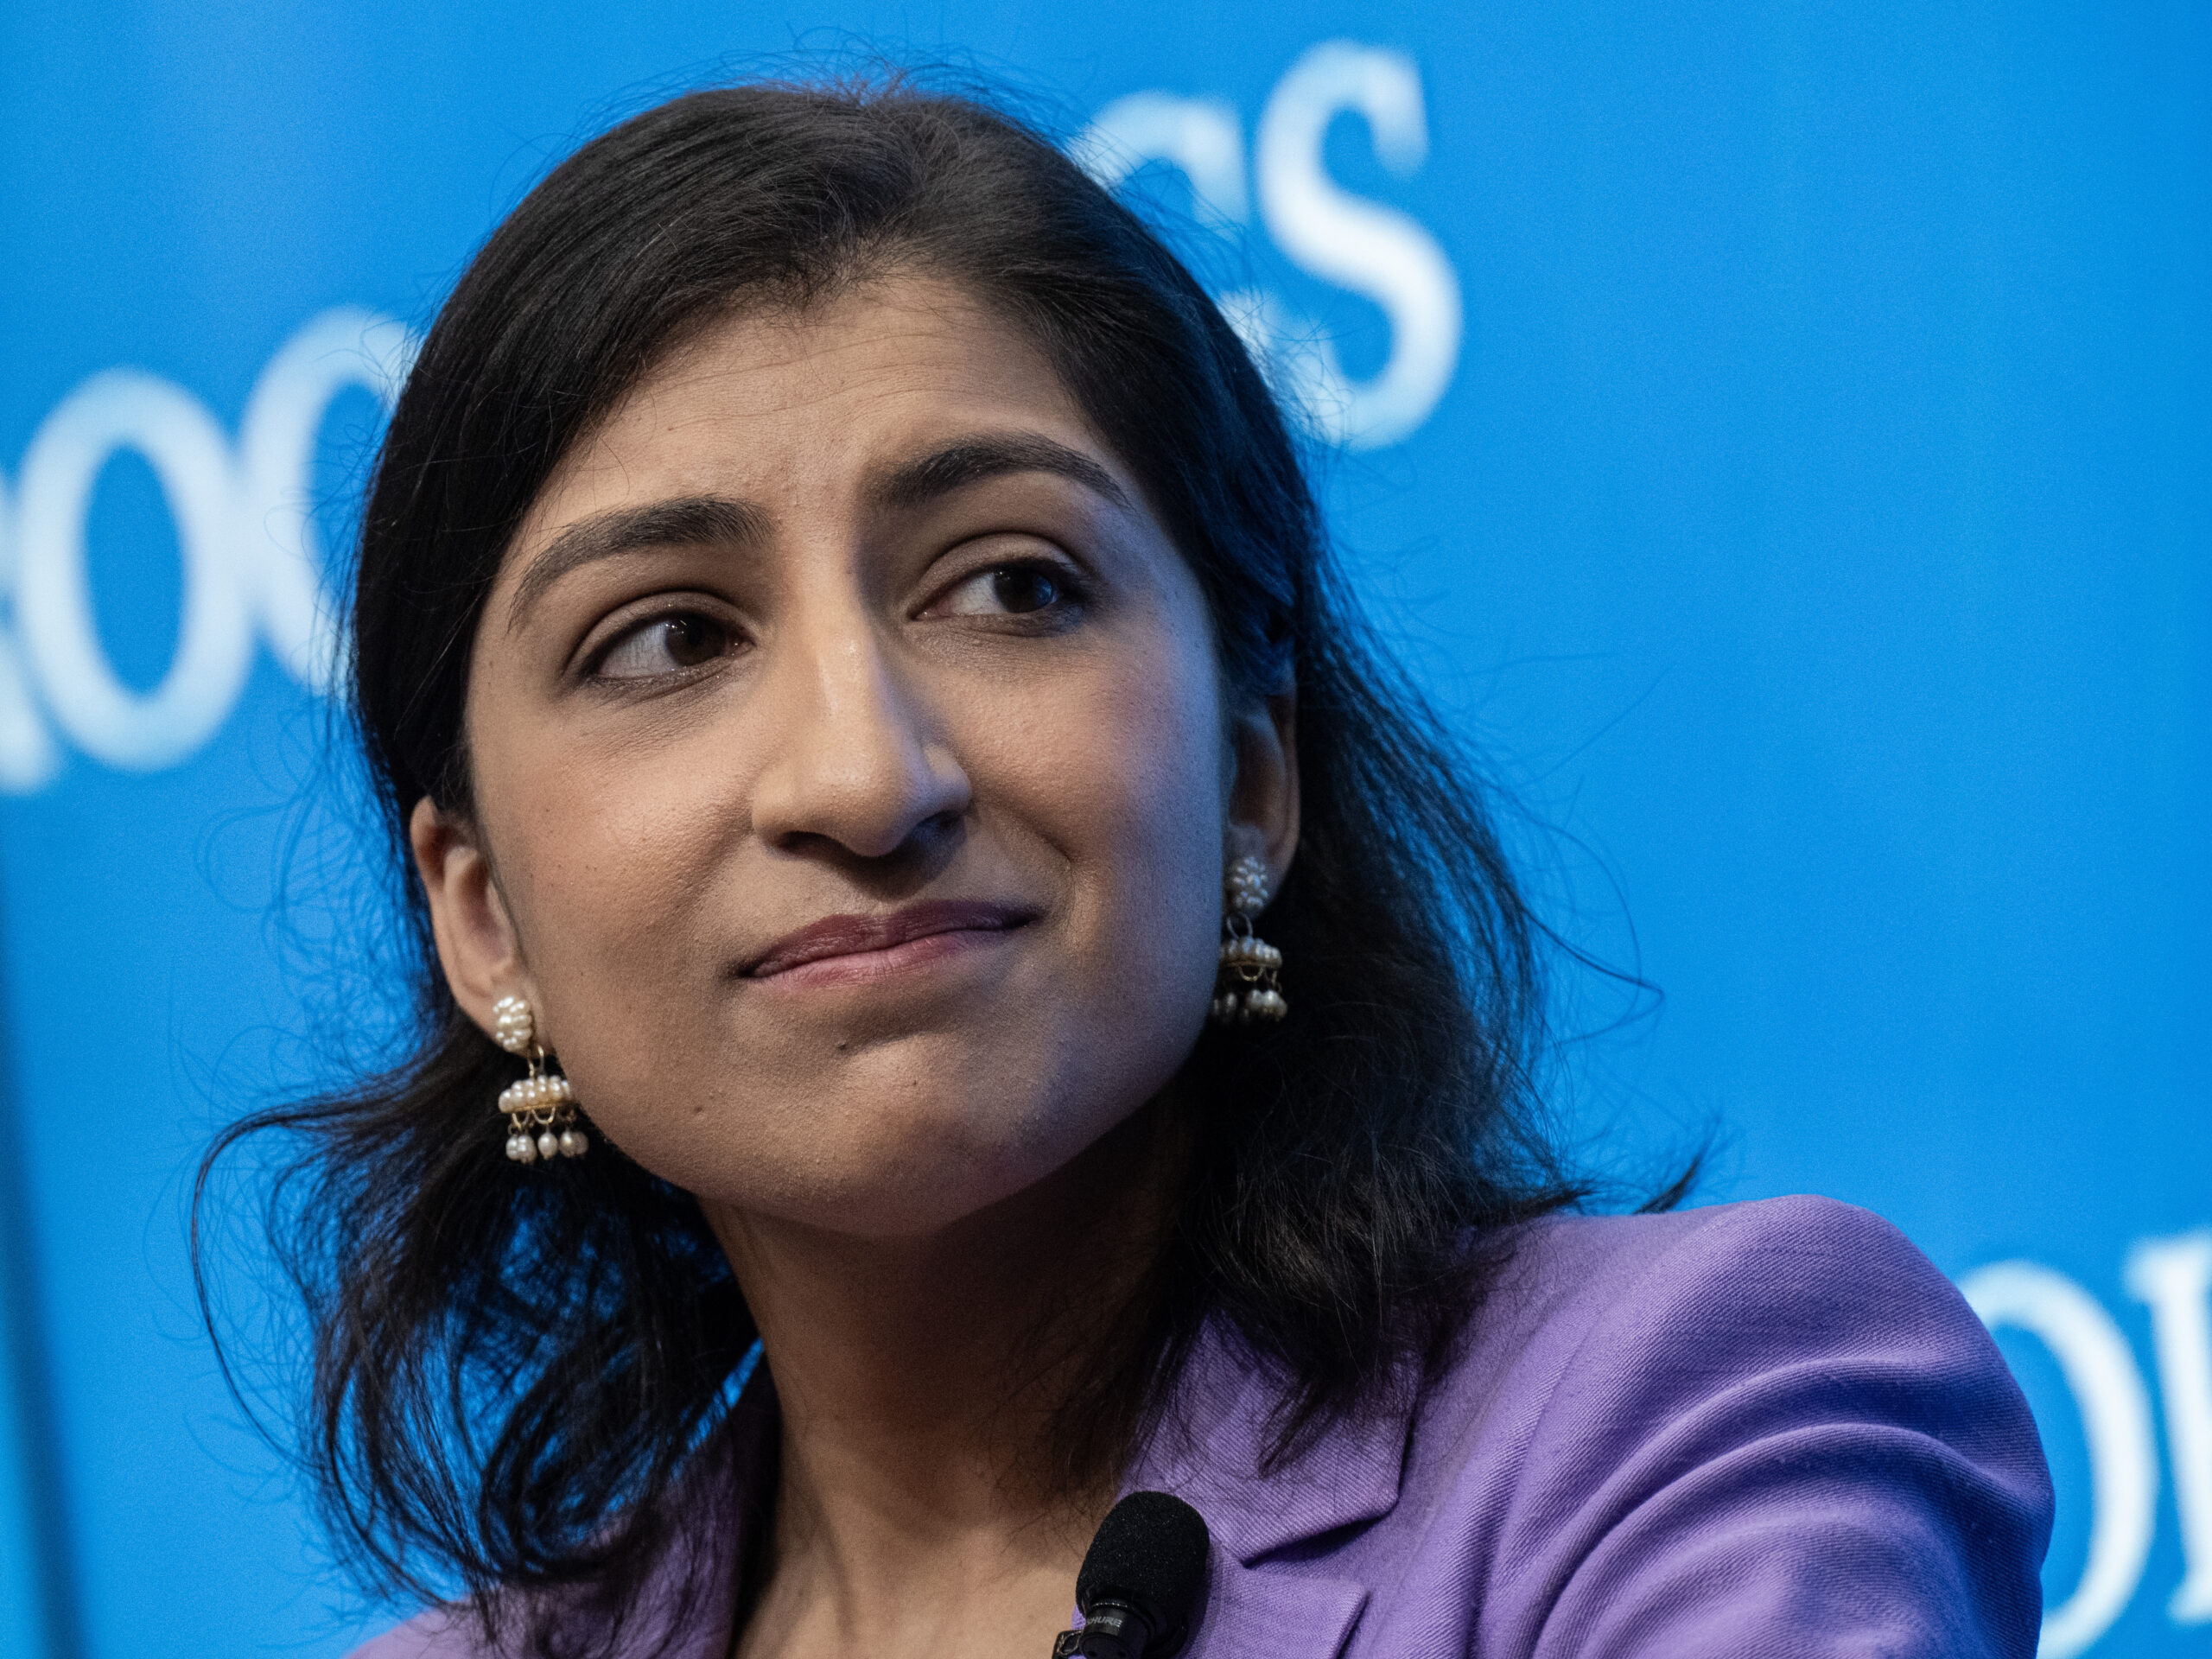 Federal Trade Commission Chair Lina Khan has said noncompete agreements stop workers from switching jobs, even when they could earn more money or have better working conditions.